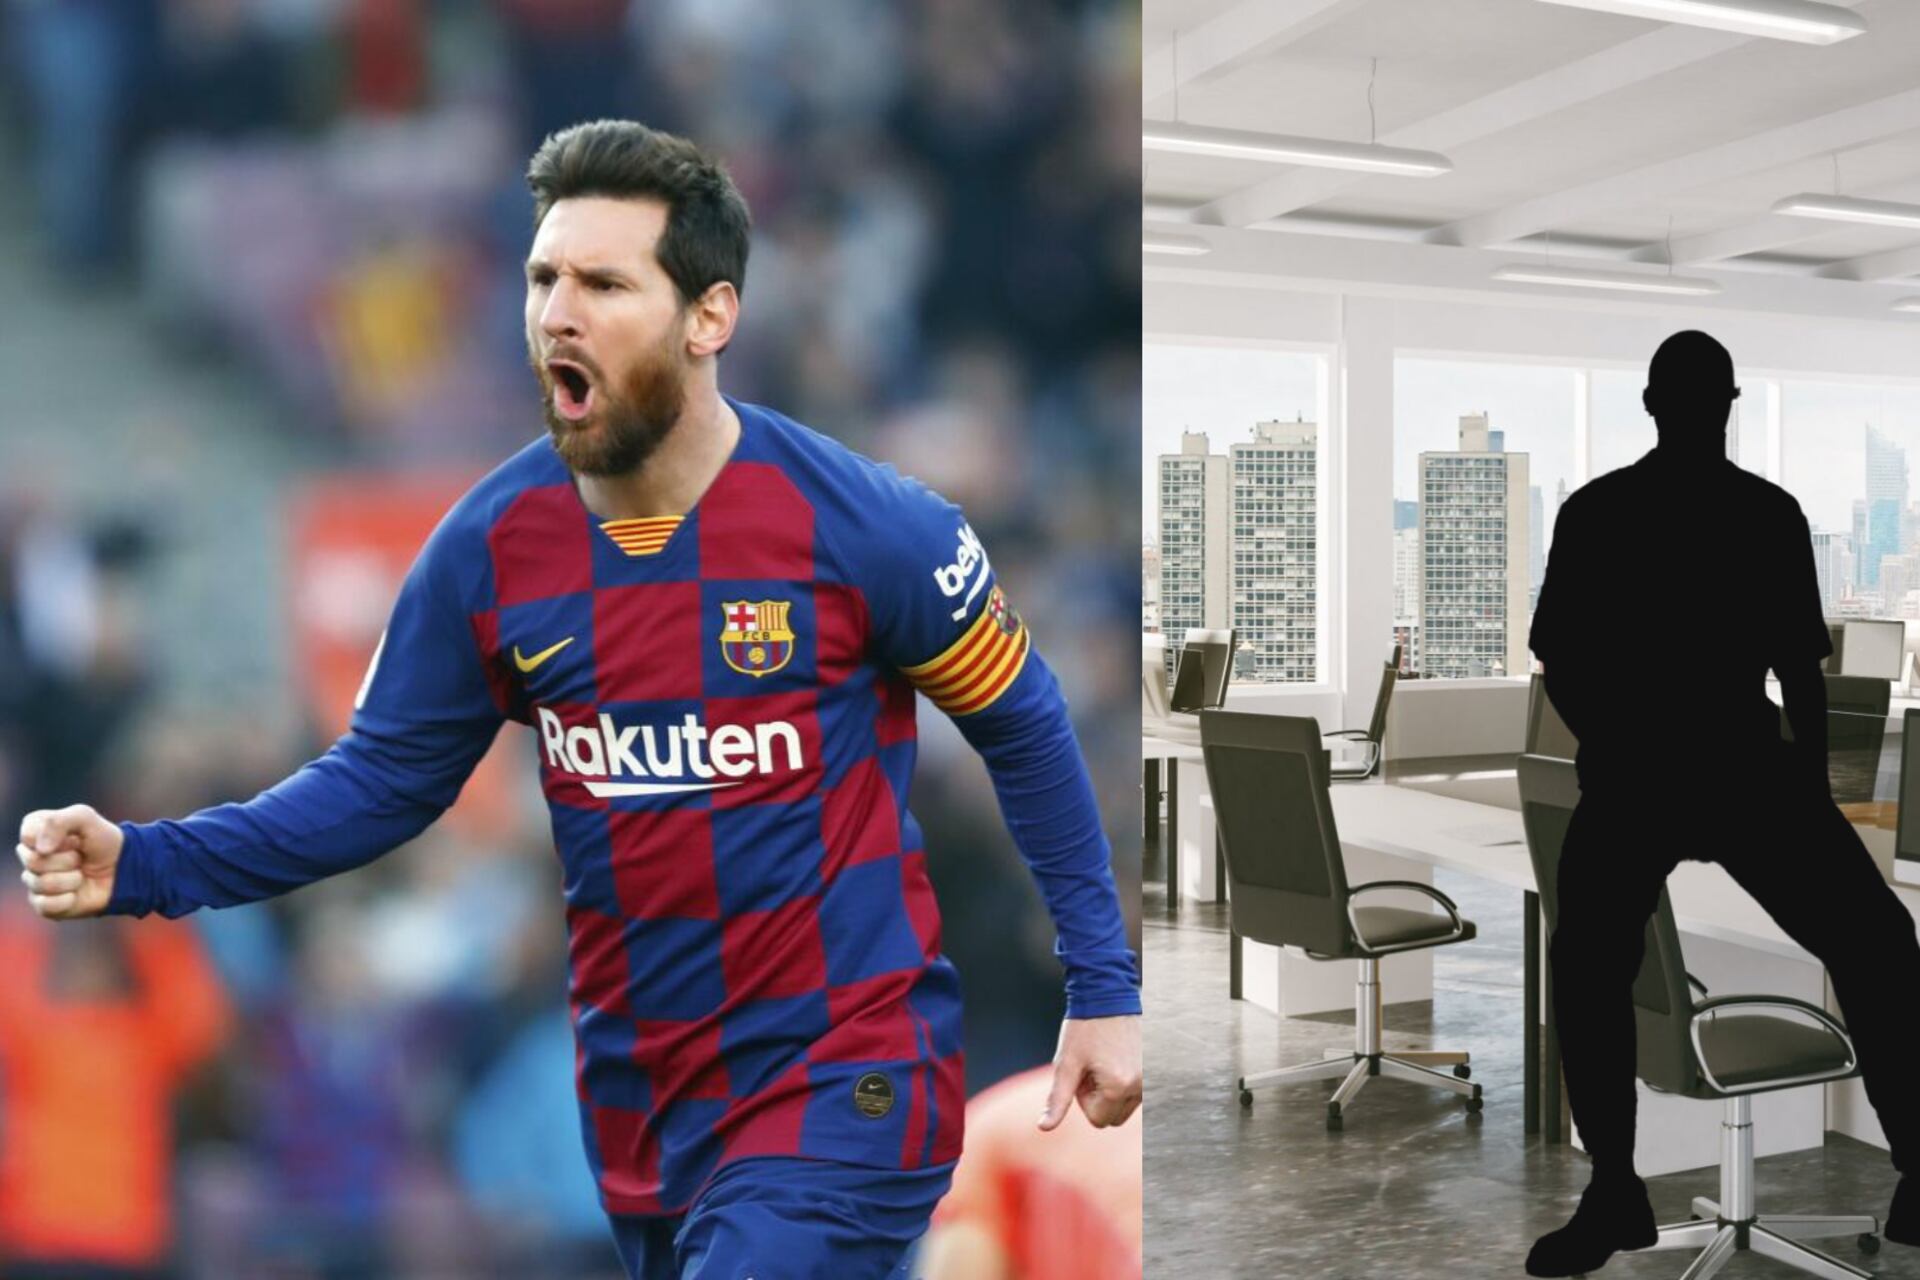 He played with Lionel Messi at Barcelona, now he owns multiple businesses